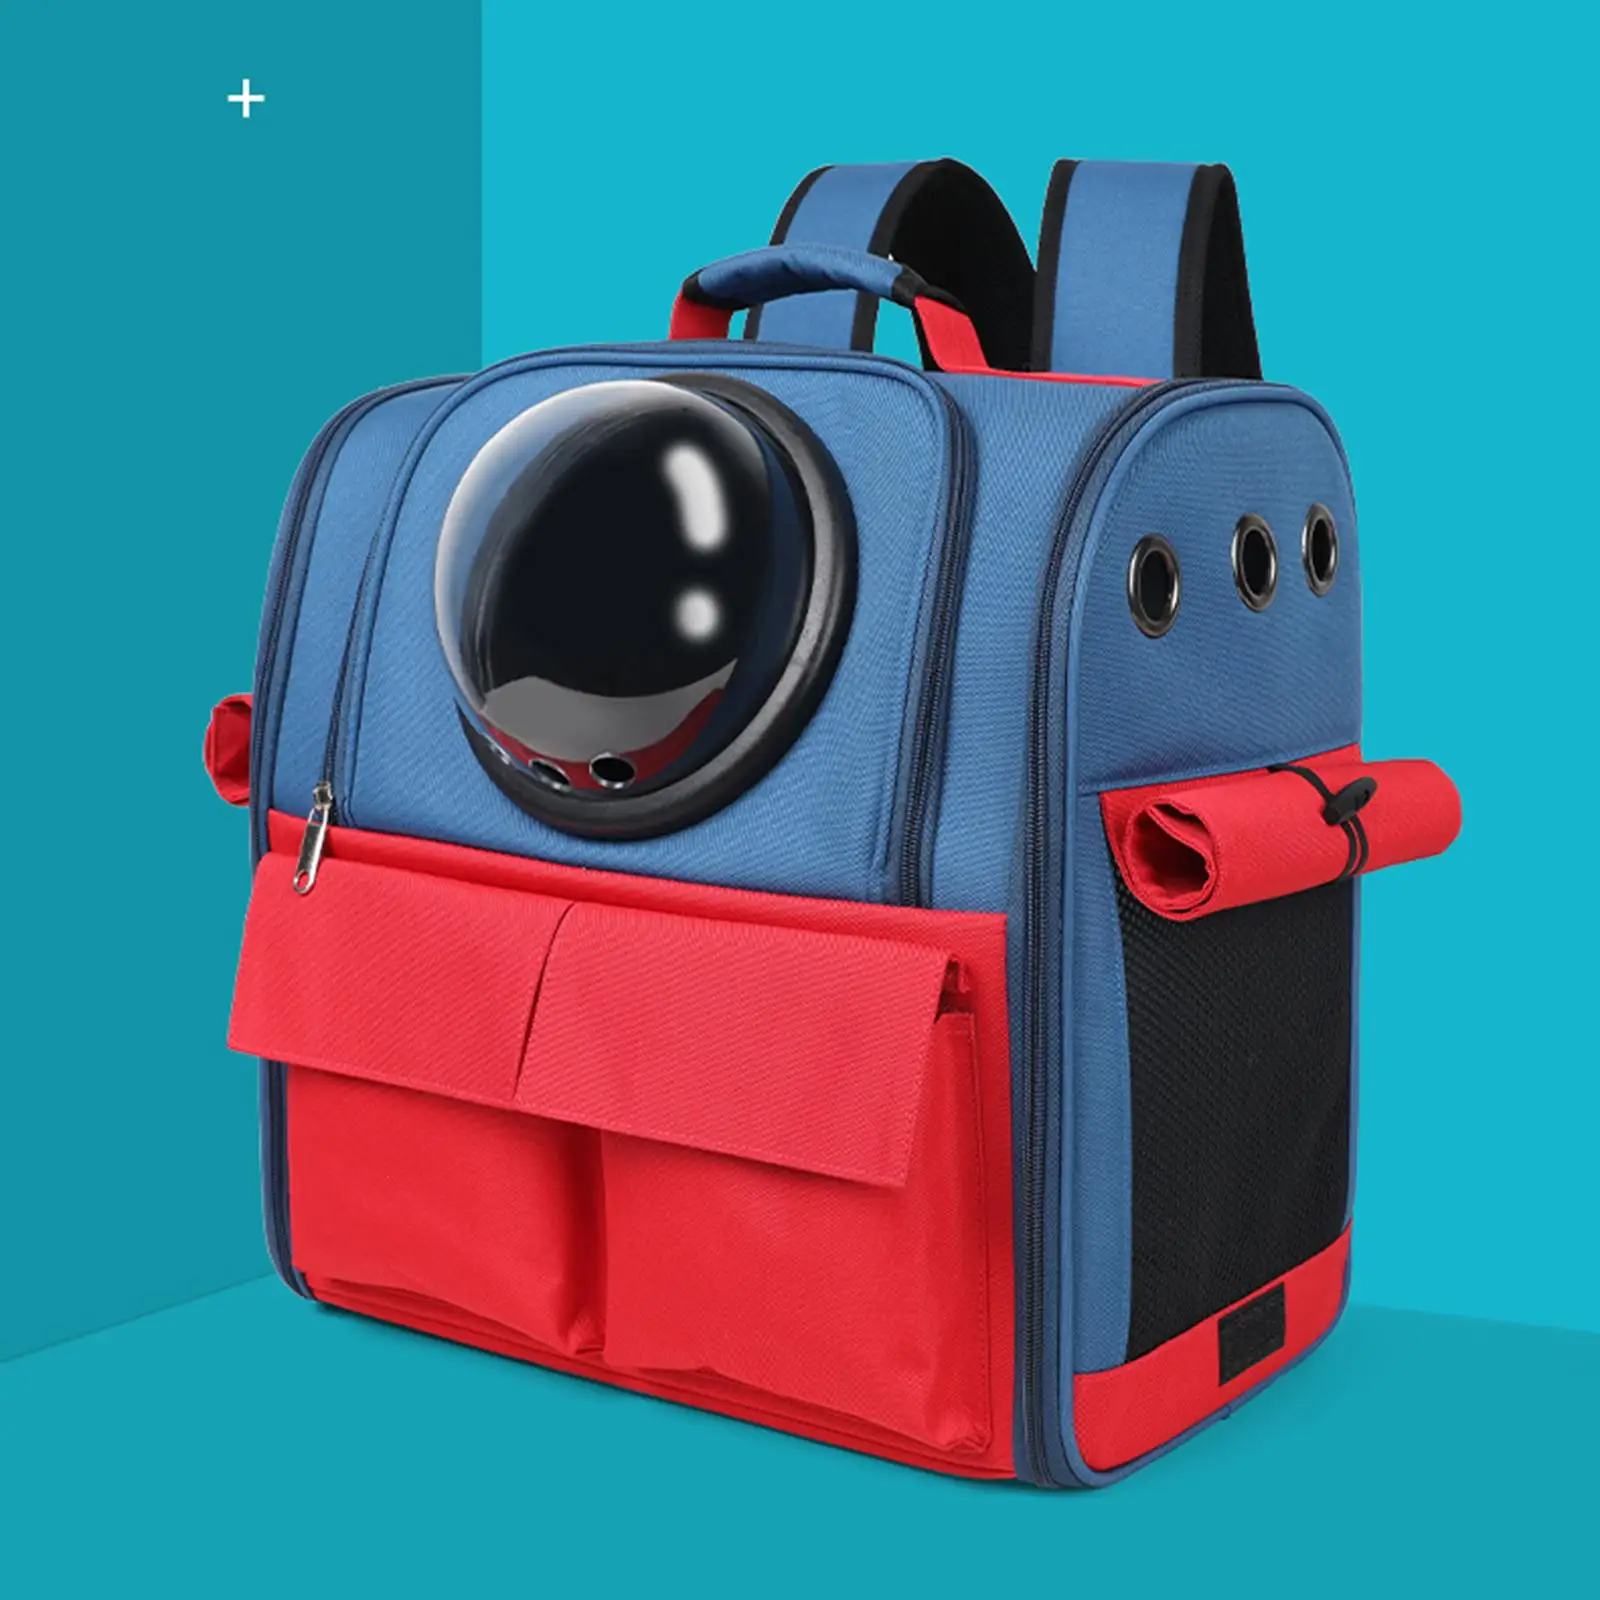 Foldable Pet Cat Carrier Backpack Dog Capsule Shoulder Bag Breathable Carrying Bag Tote Puppy Waterproof for Travel Outdoor